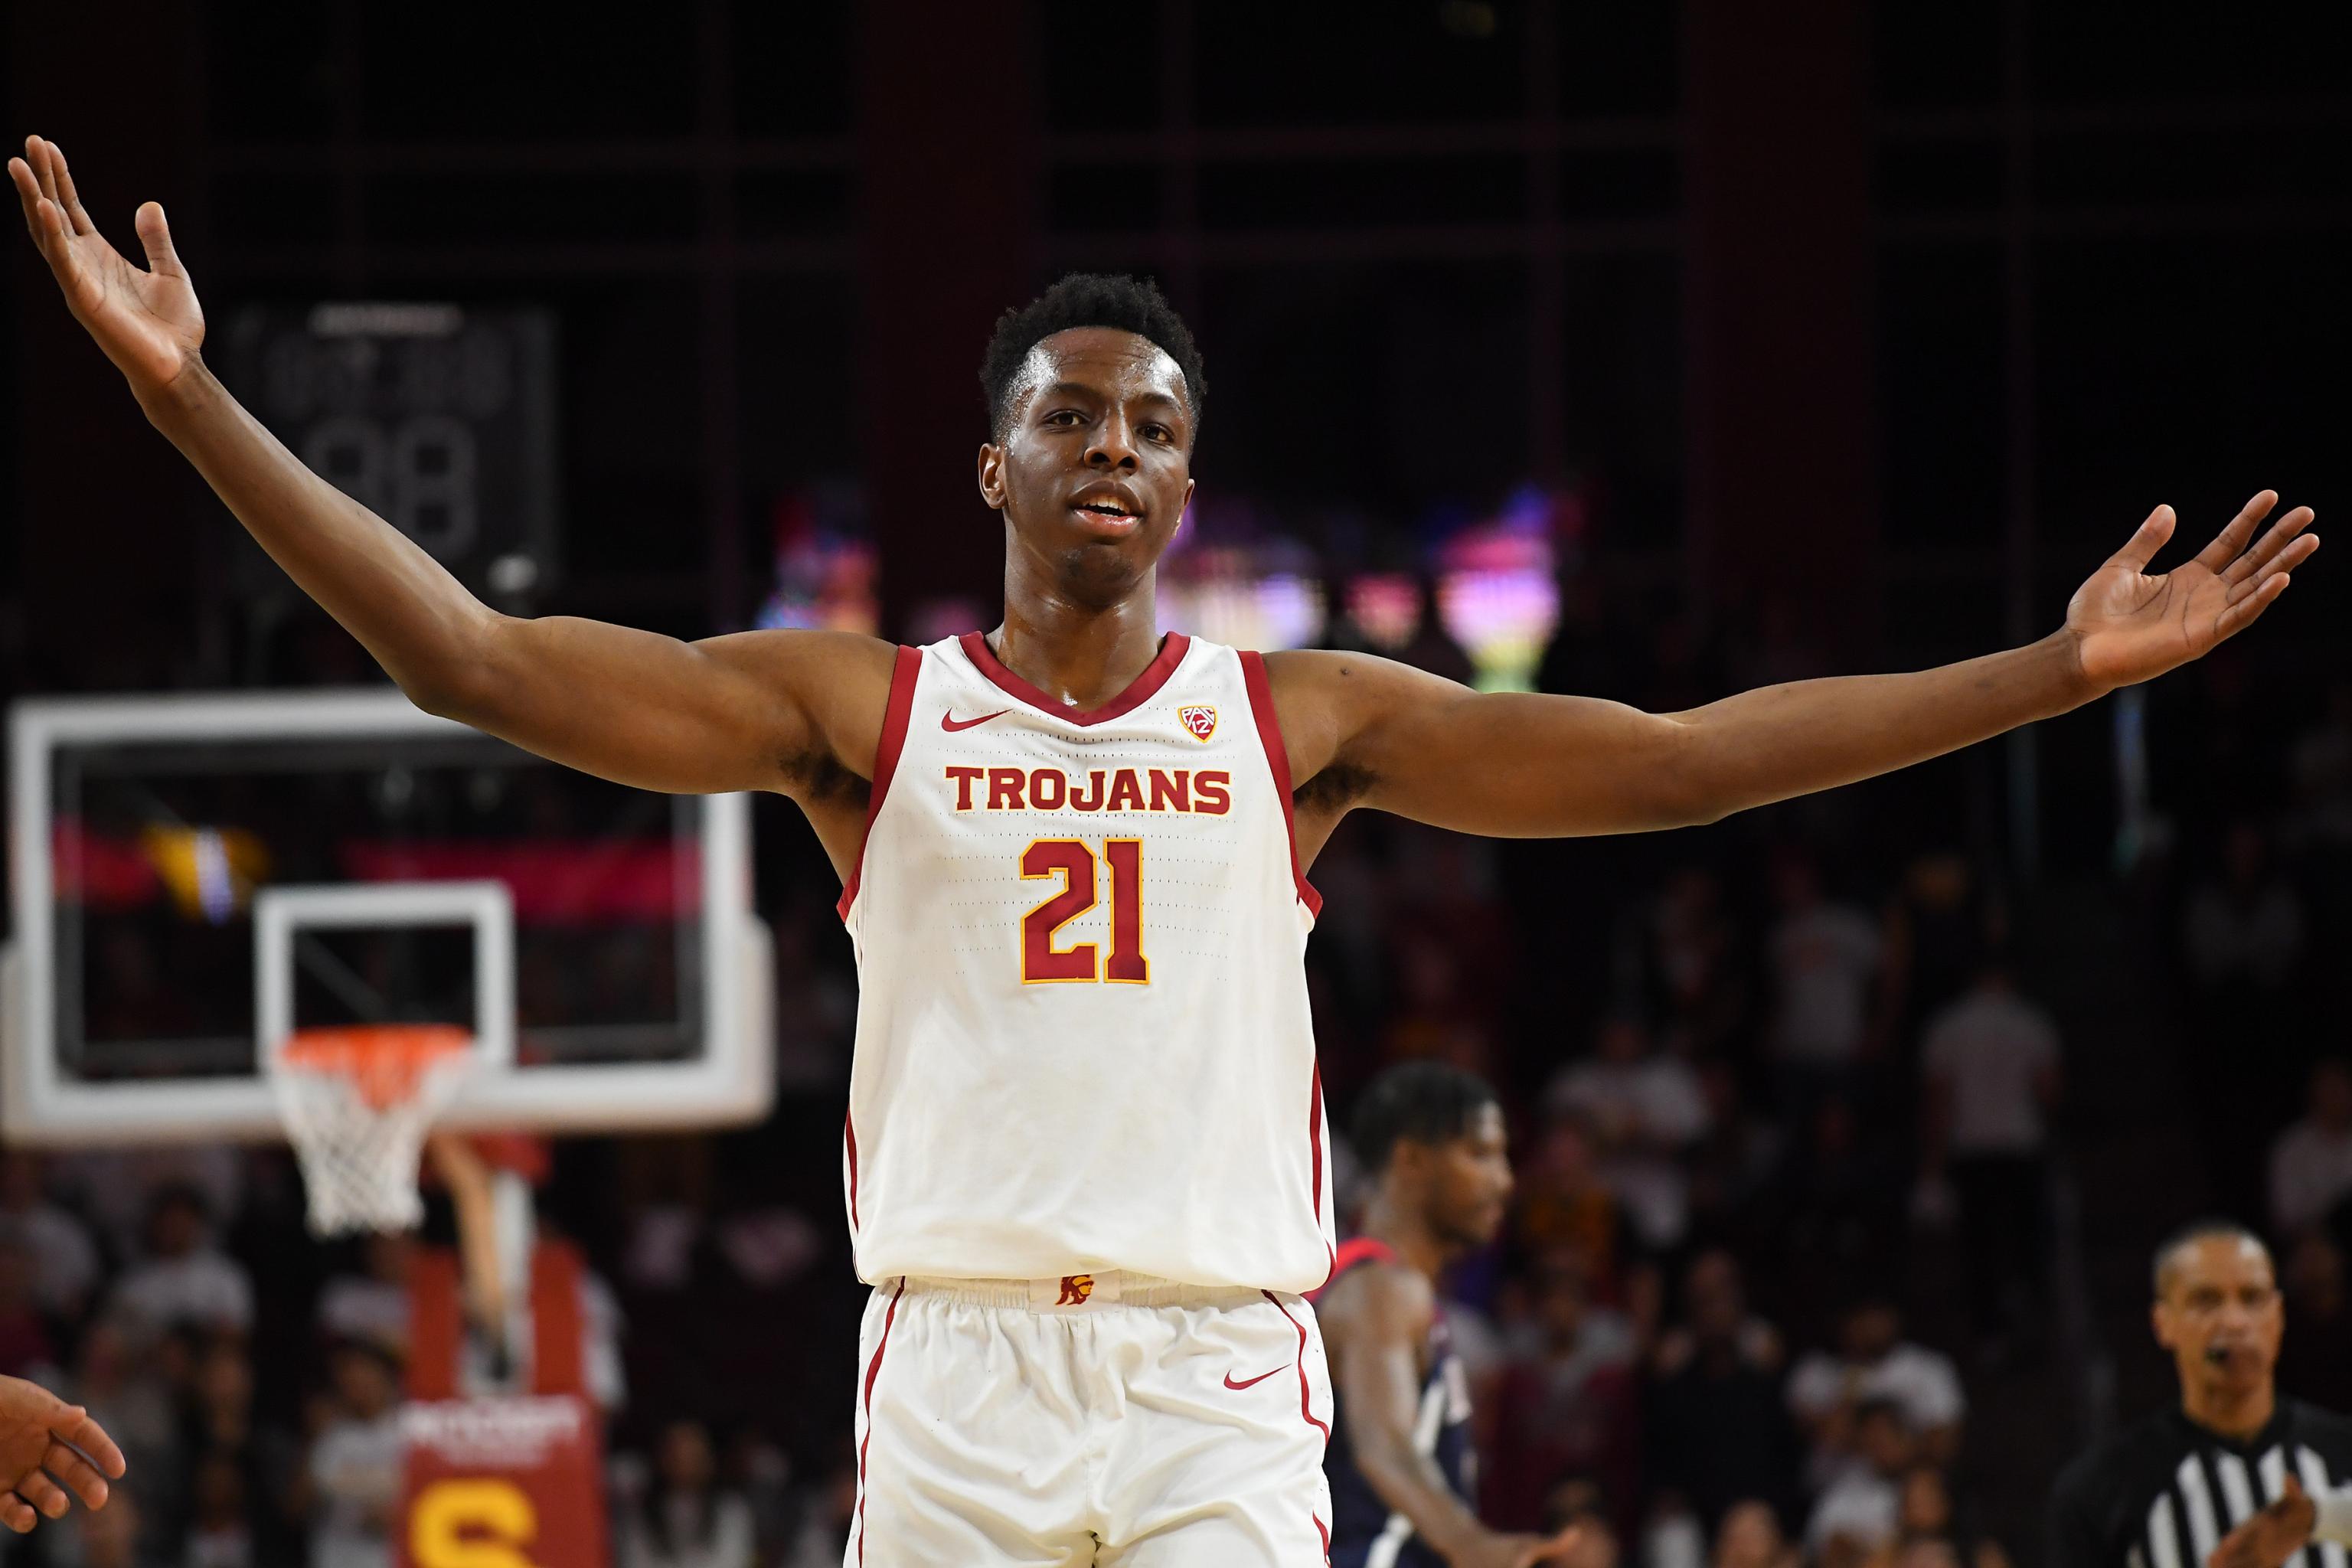 2020 Nba Draft Projecting Top Prospect Fits For Warriors Knicks And More Teams Bleacher Report Latest News Videos And Highlights